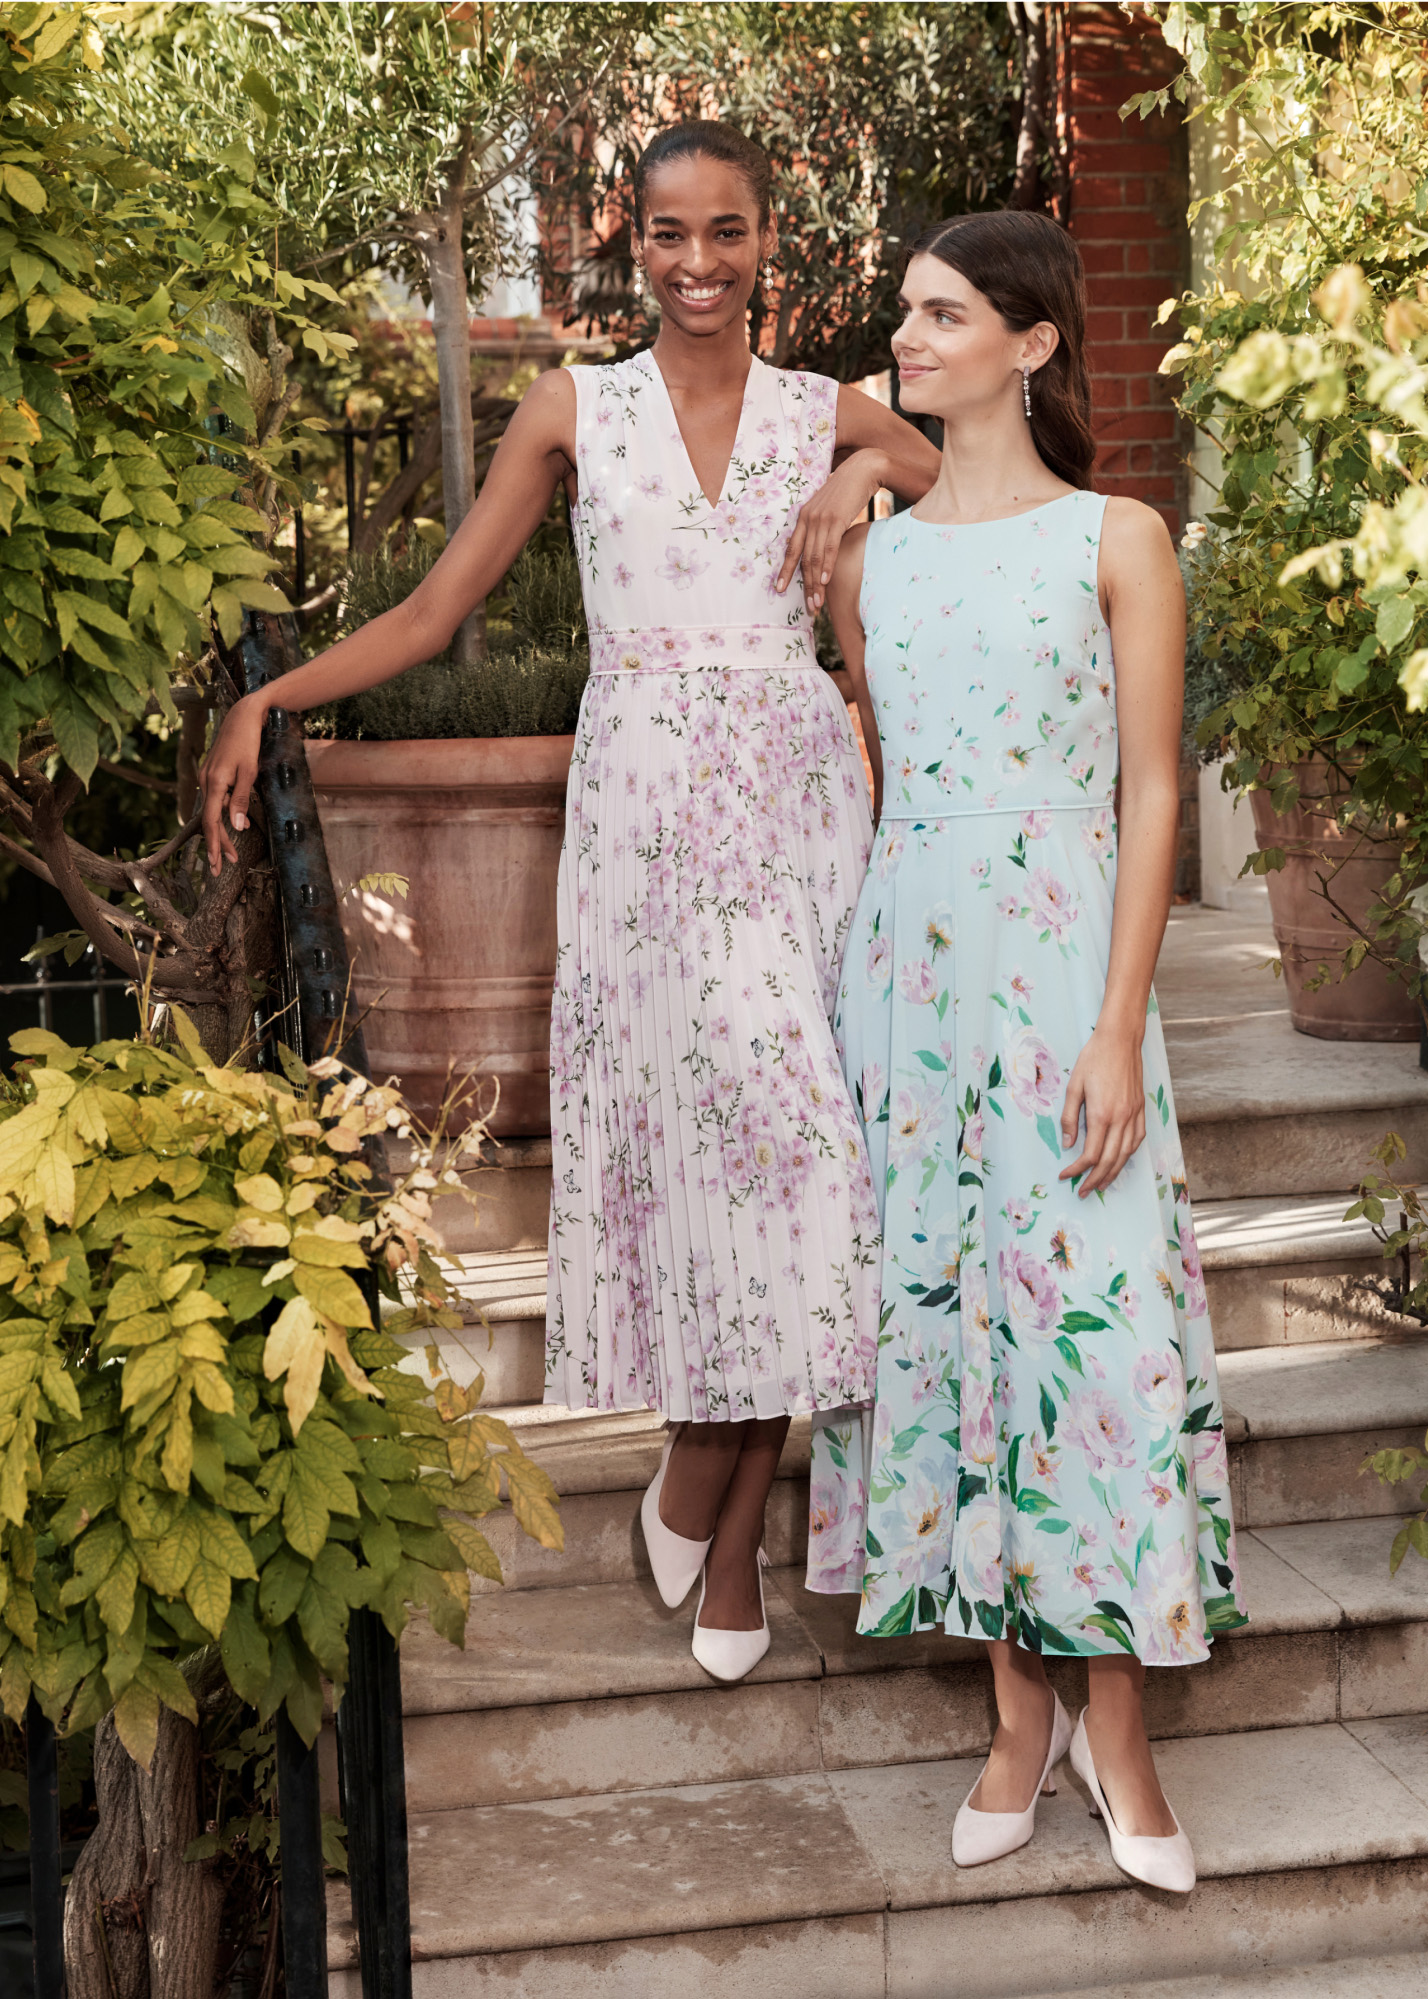 Image of two models standing outside a wedding venue wearing bridesmaid dresses.